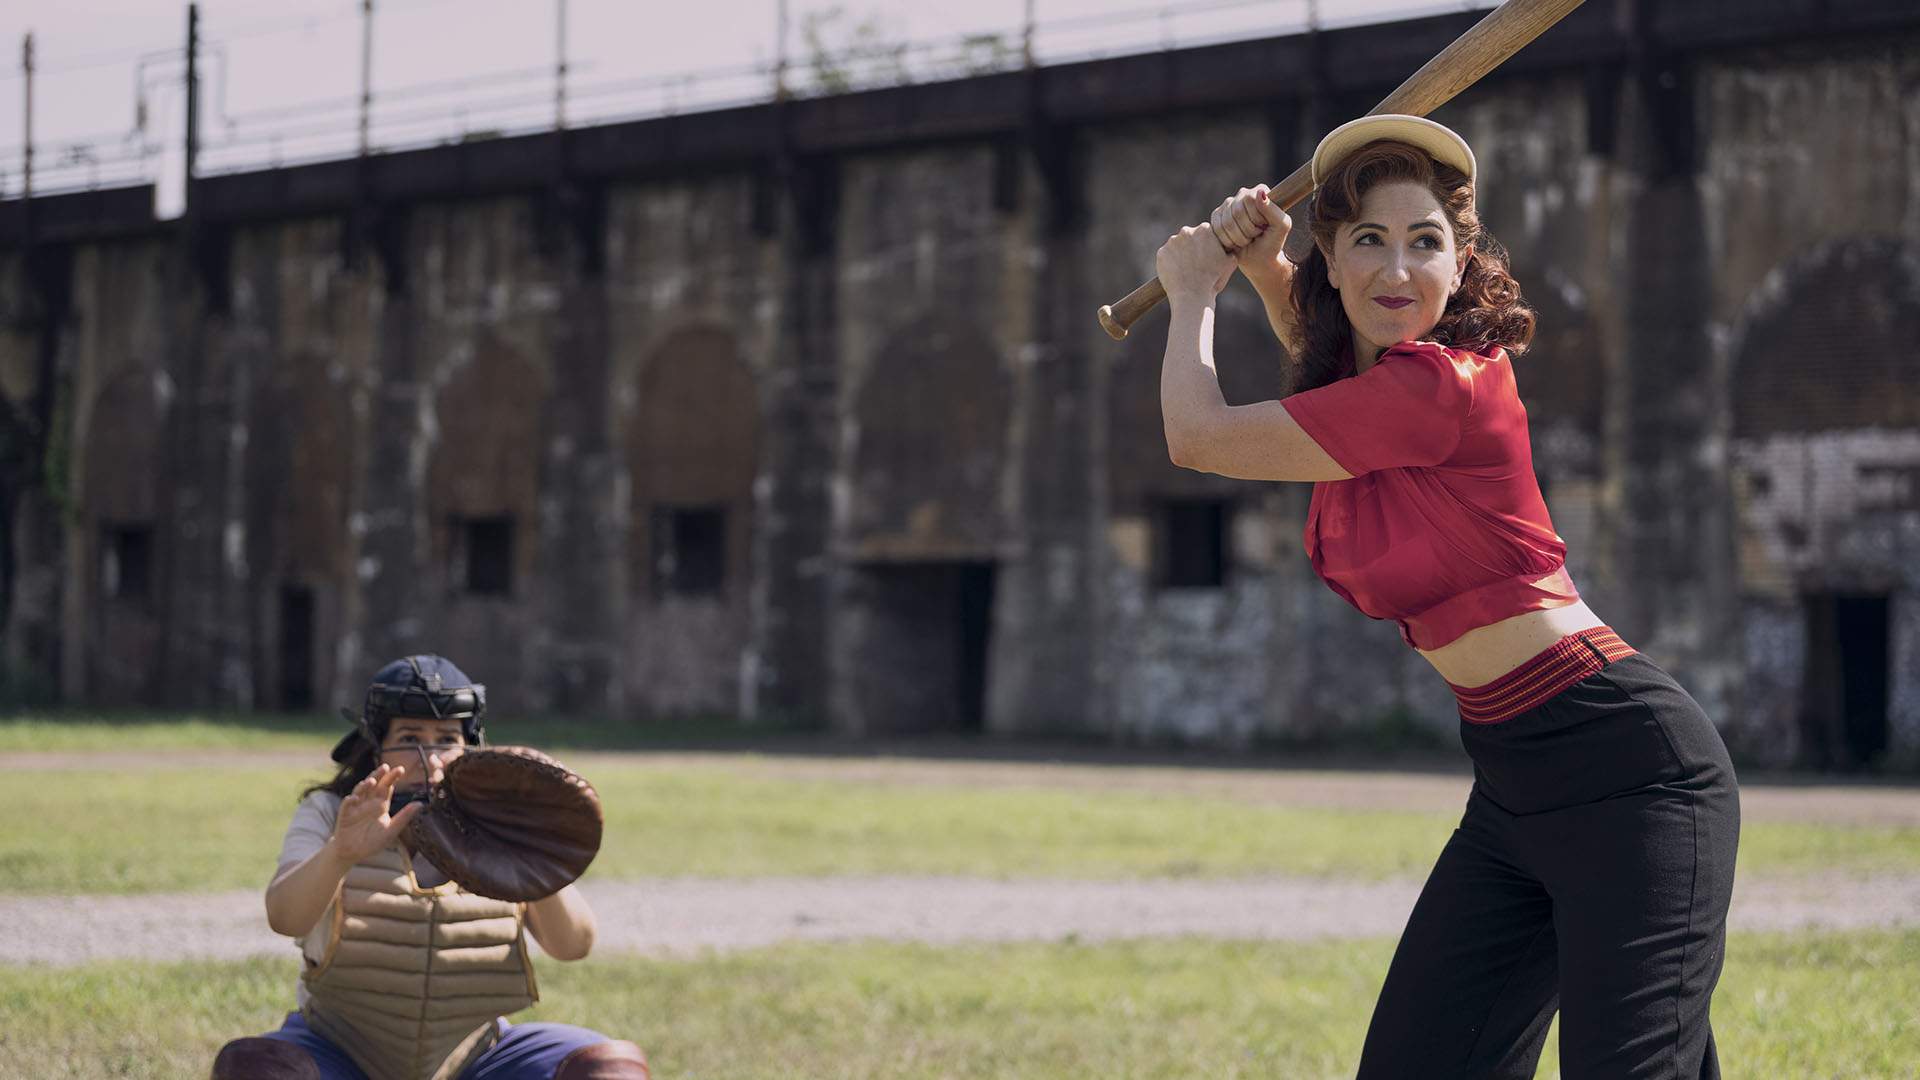 Batter Up: The Full Trailer for Prime Video's New 'A League of Their Own' Series Is Here